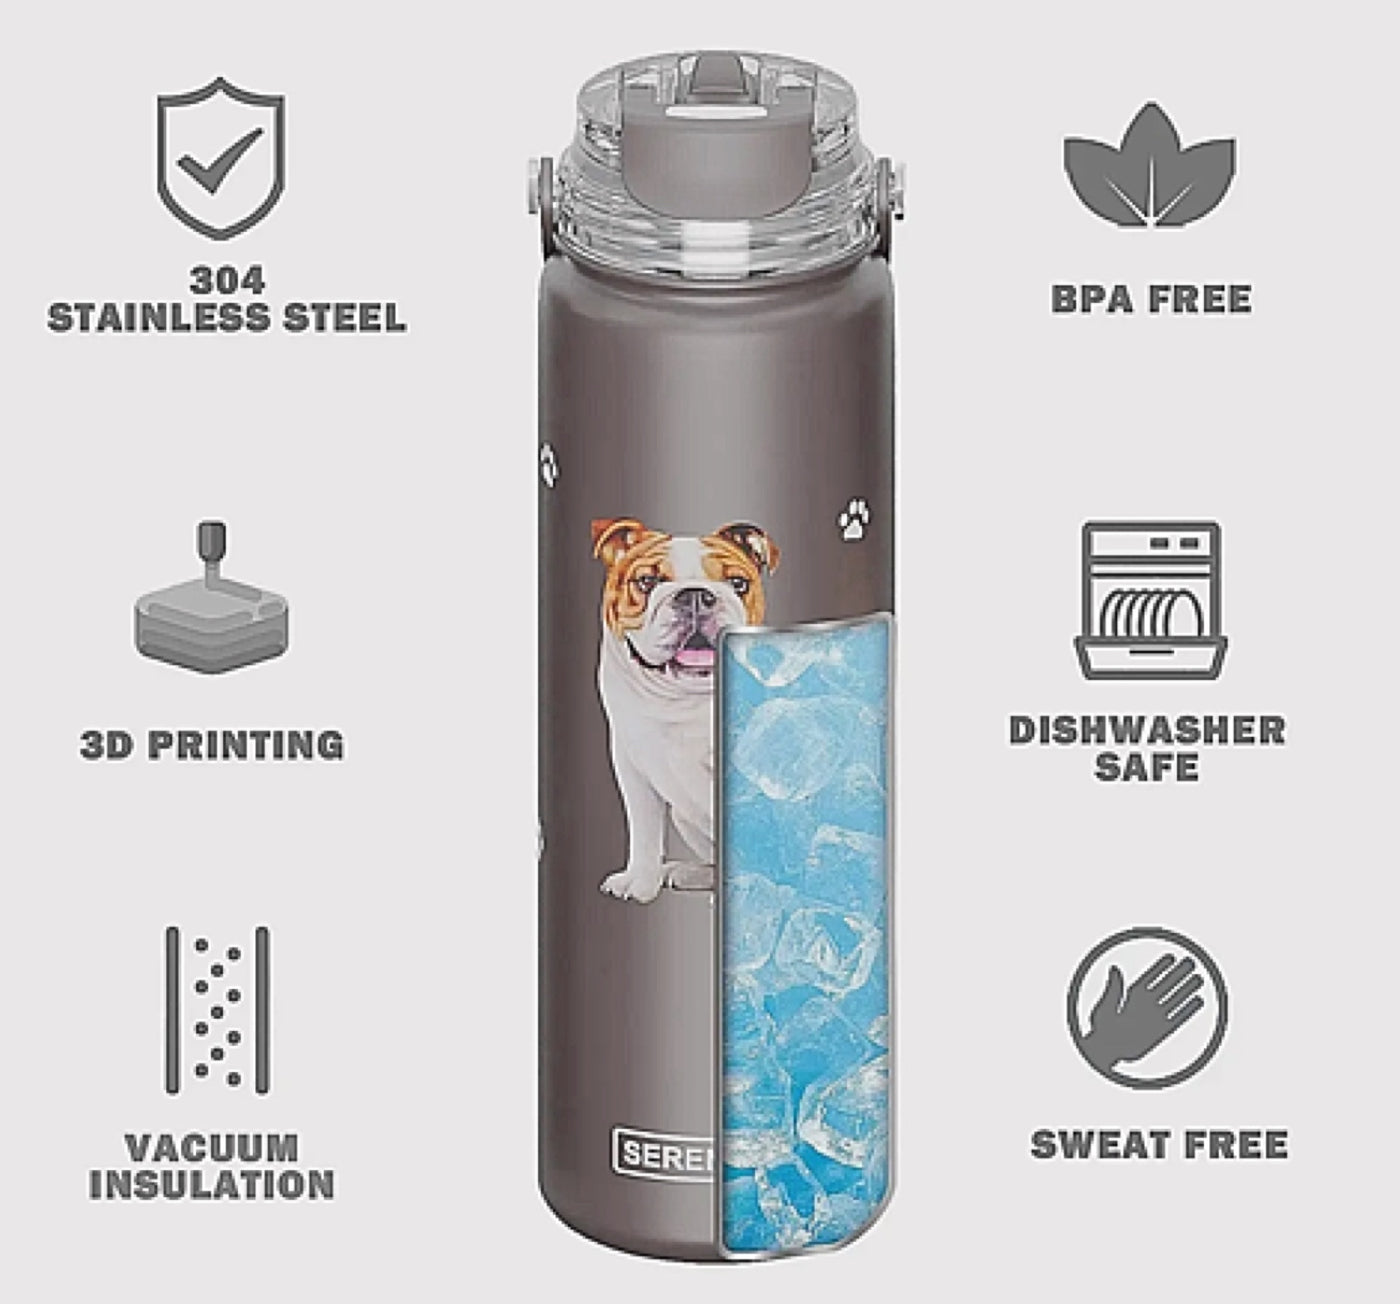 Imprinted 24 oz Stainless King Stainless Steel Drink Bottle